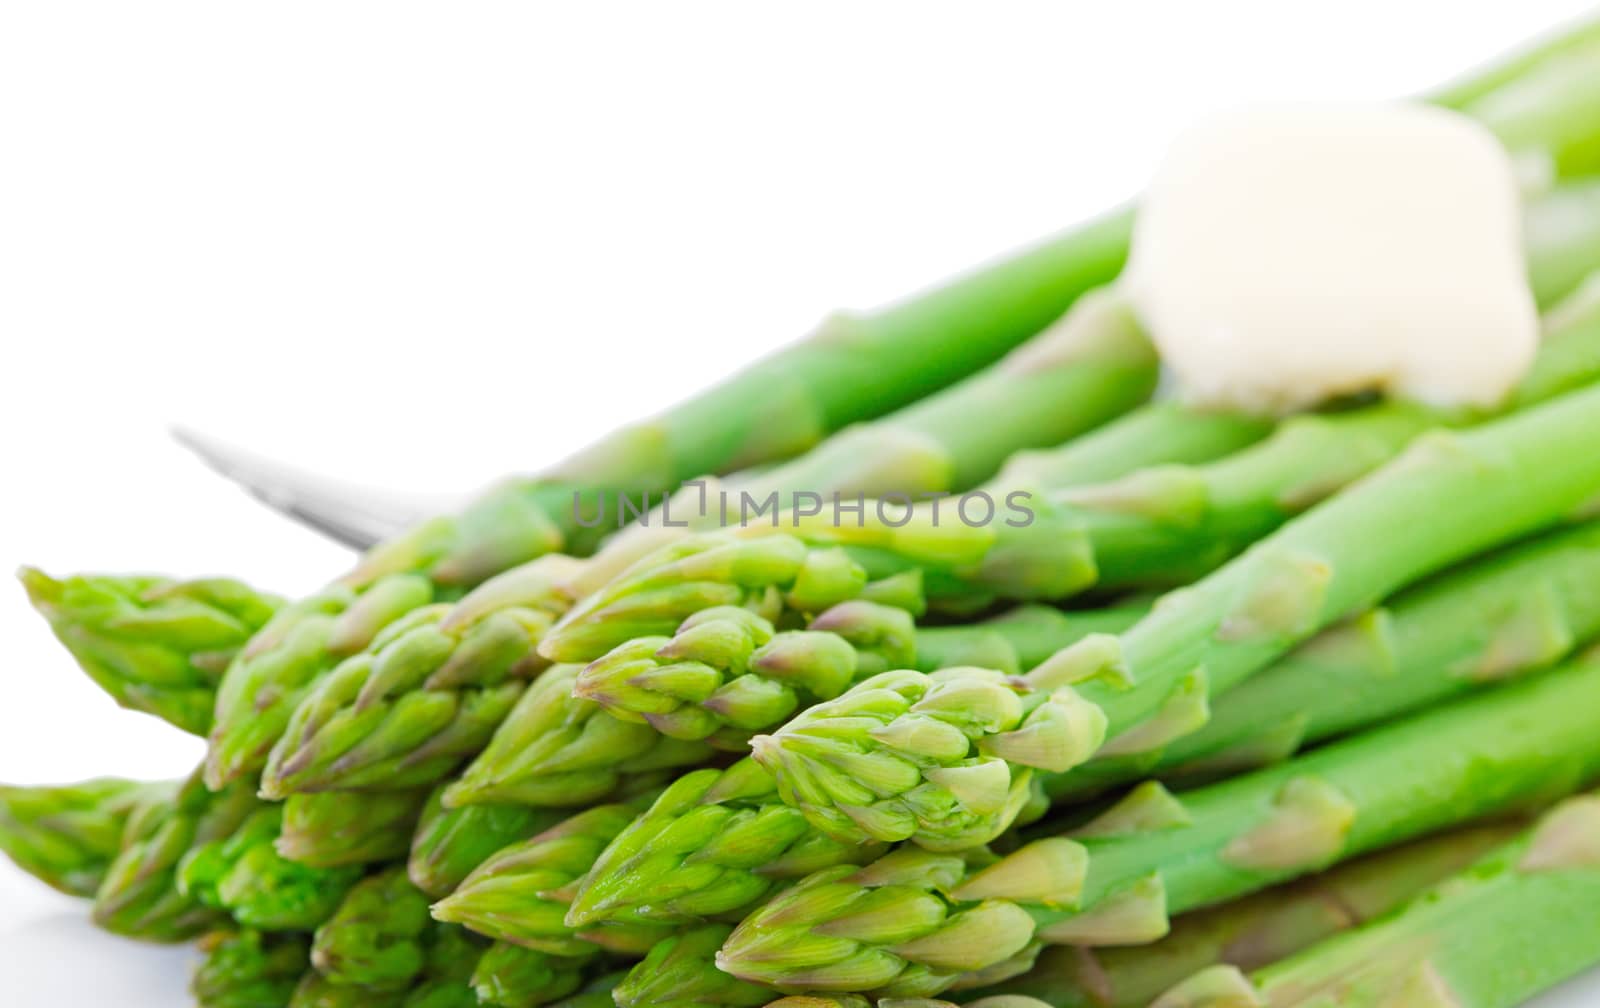 Cooked Asparagus With Butter by songbird839